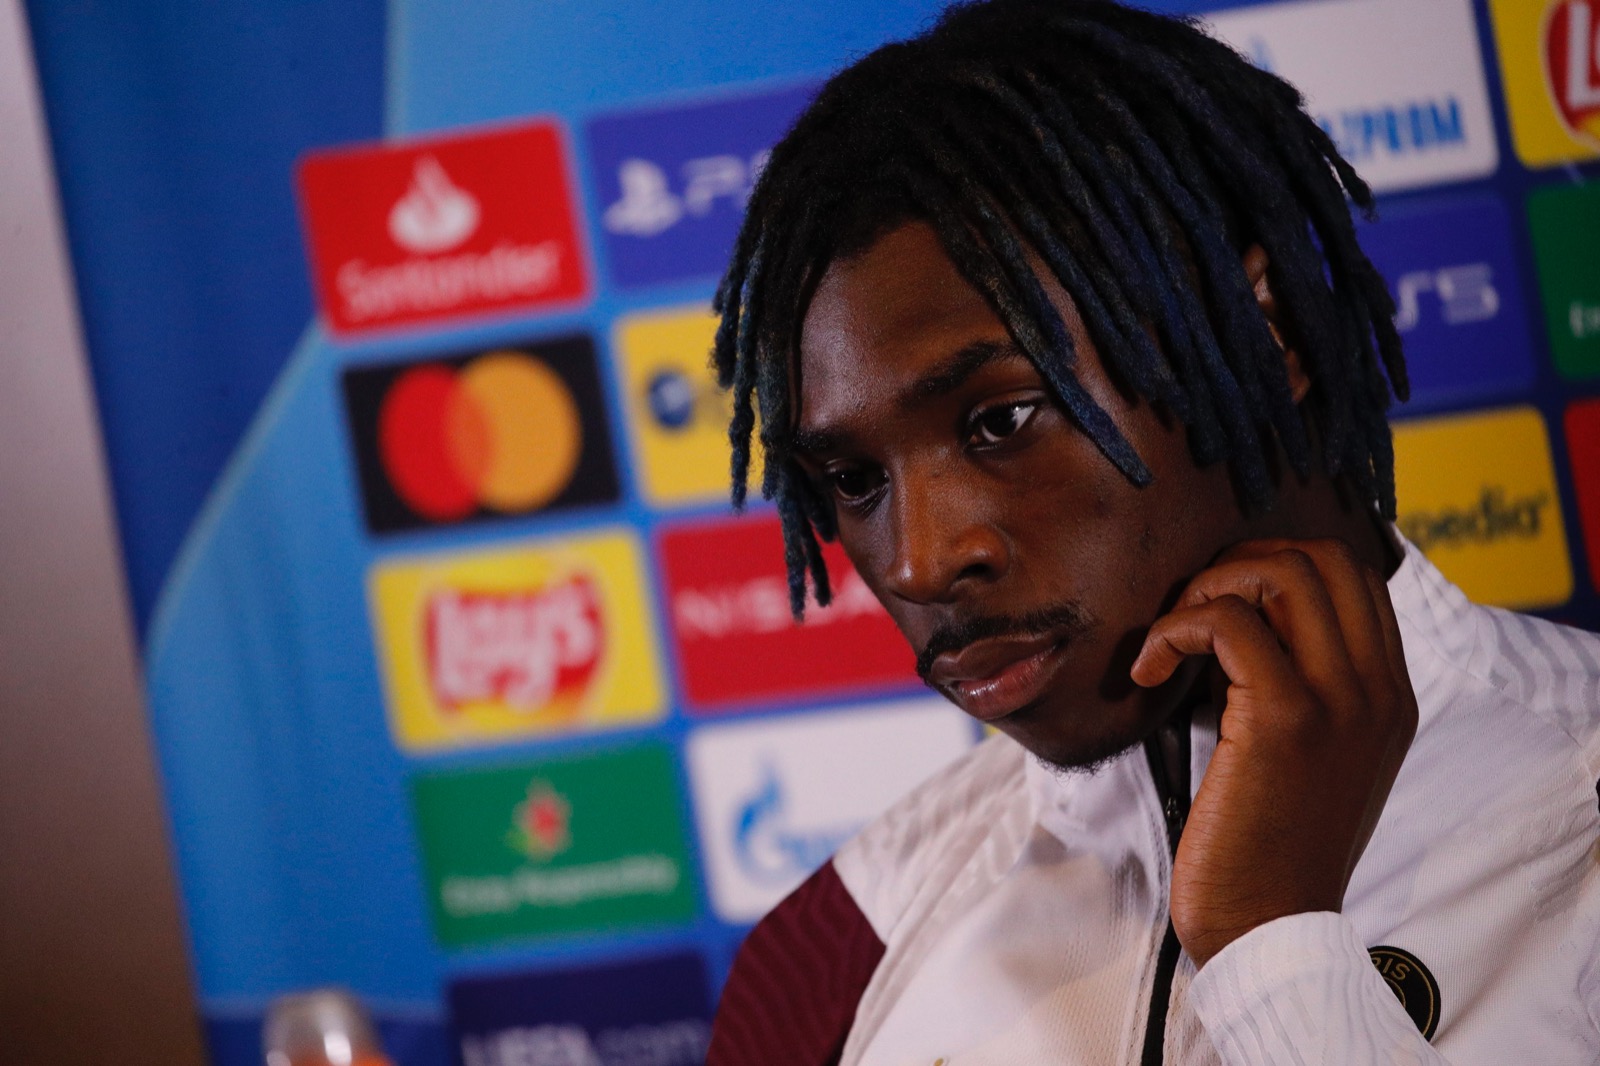 Never know how my future might go but I feel happy playing for PSG, admits Moise Kean